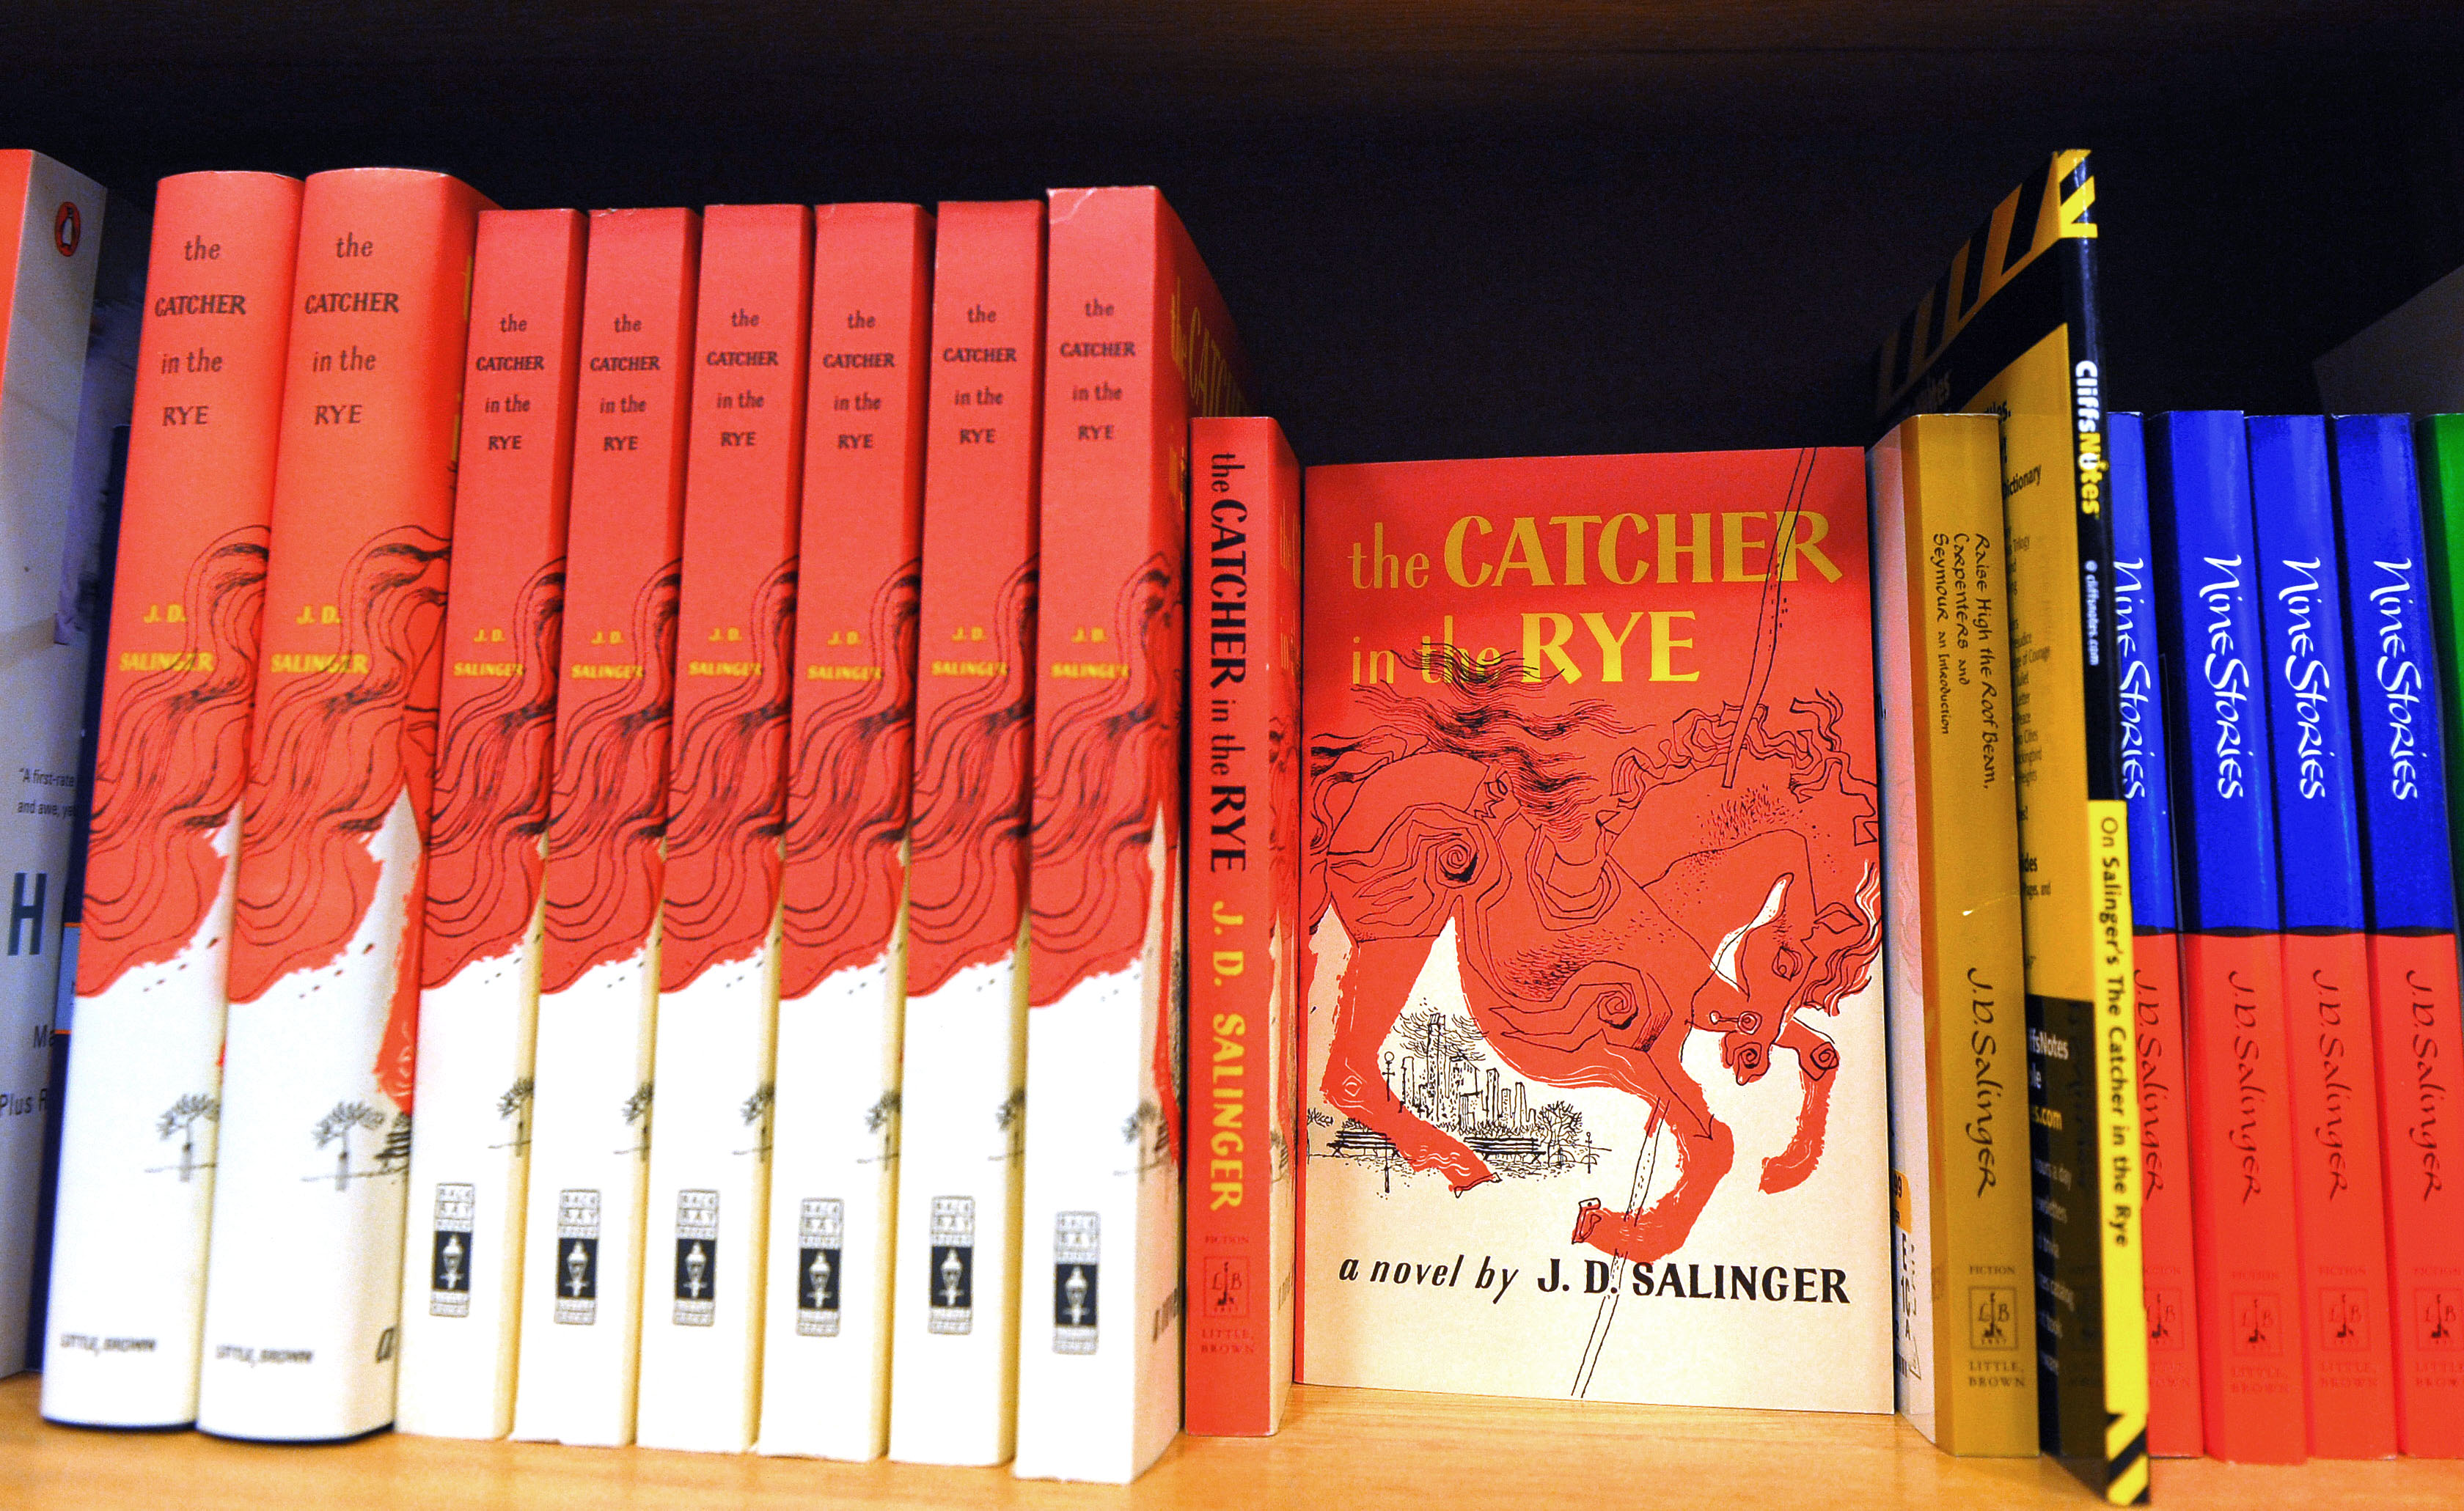 A January 28, 2010 photo shows a copies of "The Catcher in the Rye" by author J.D. Salinger at a bookstore in Washington, DC. (Mandel Ngan&mdash;Getty Images)